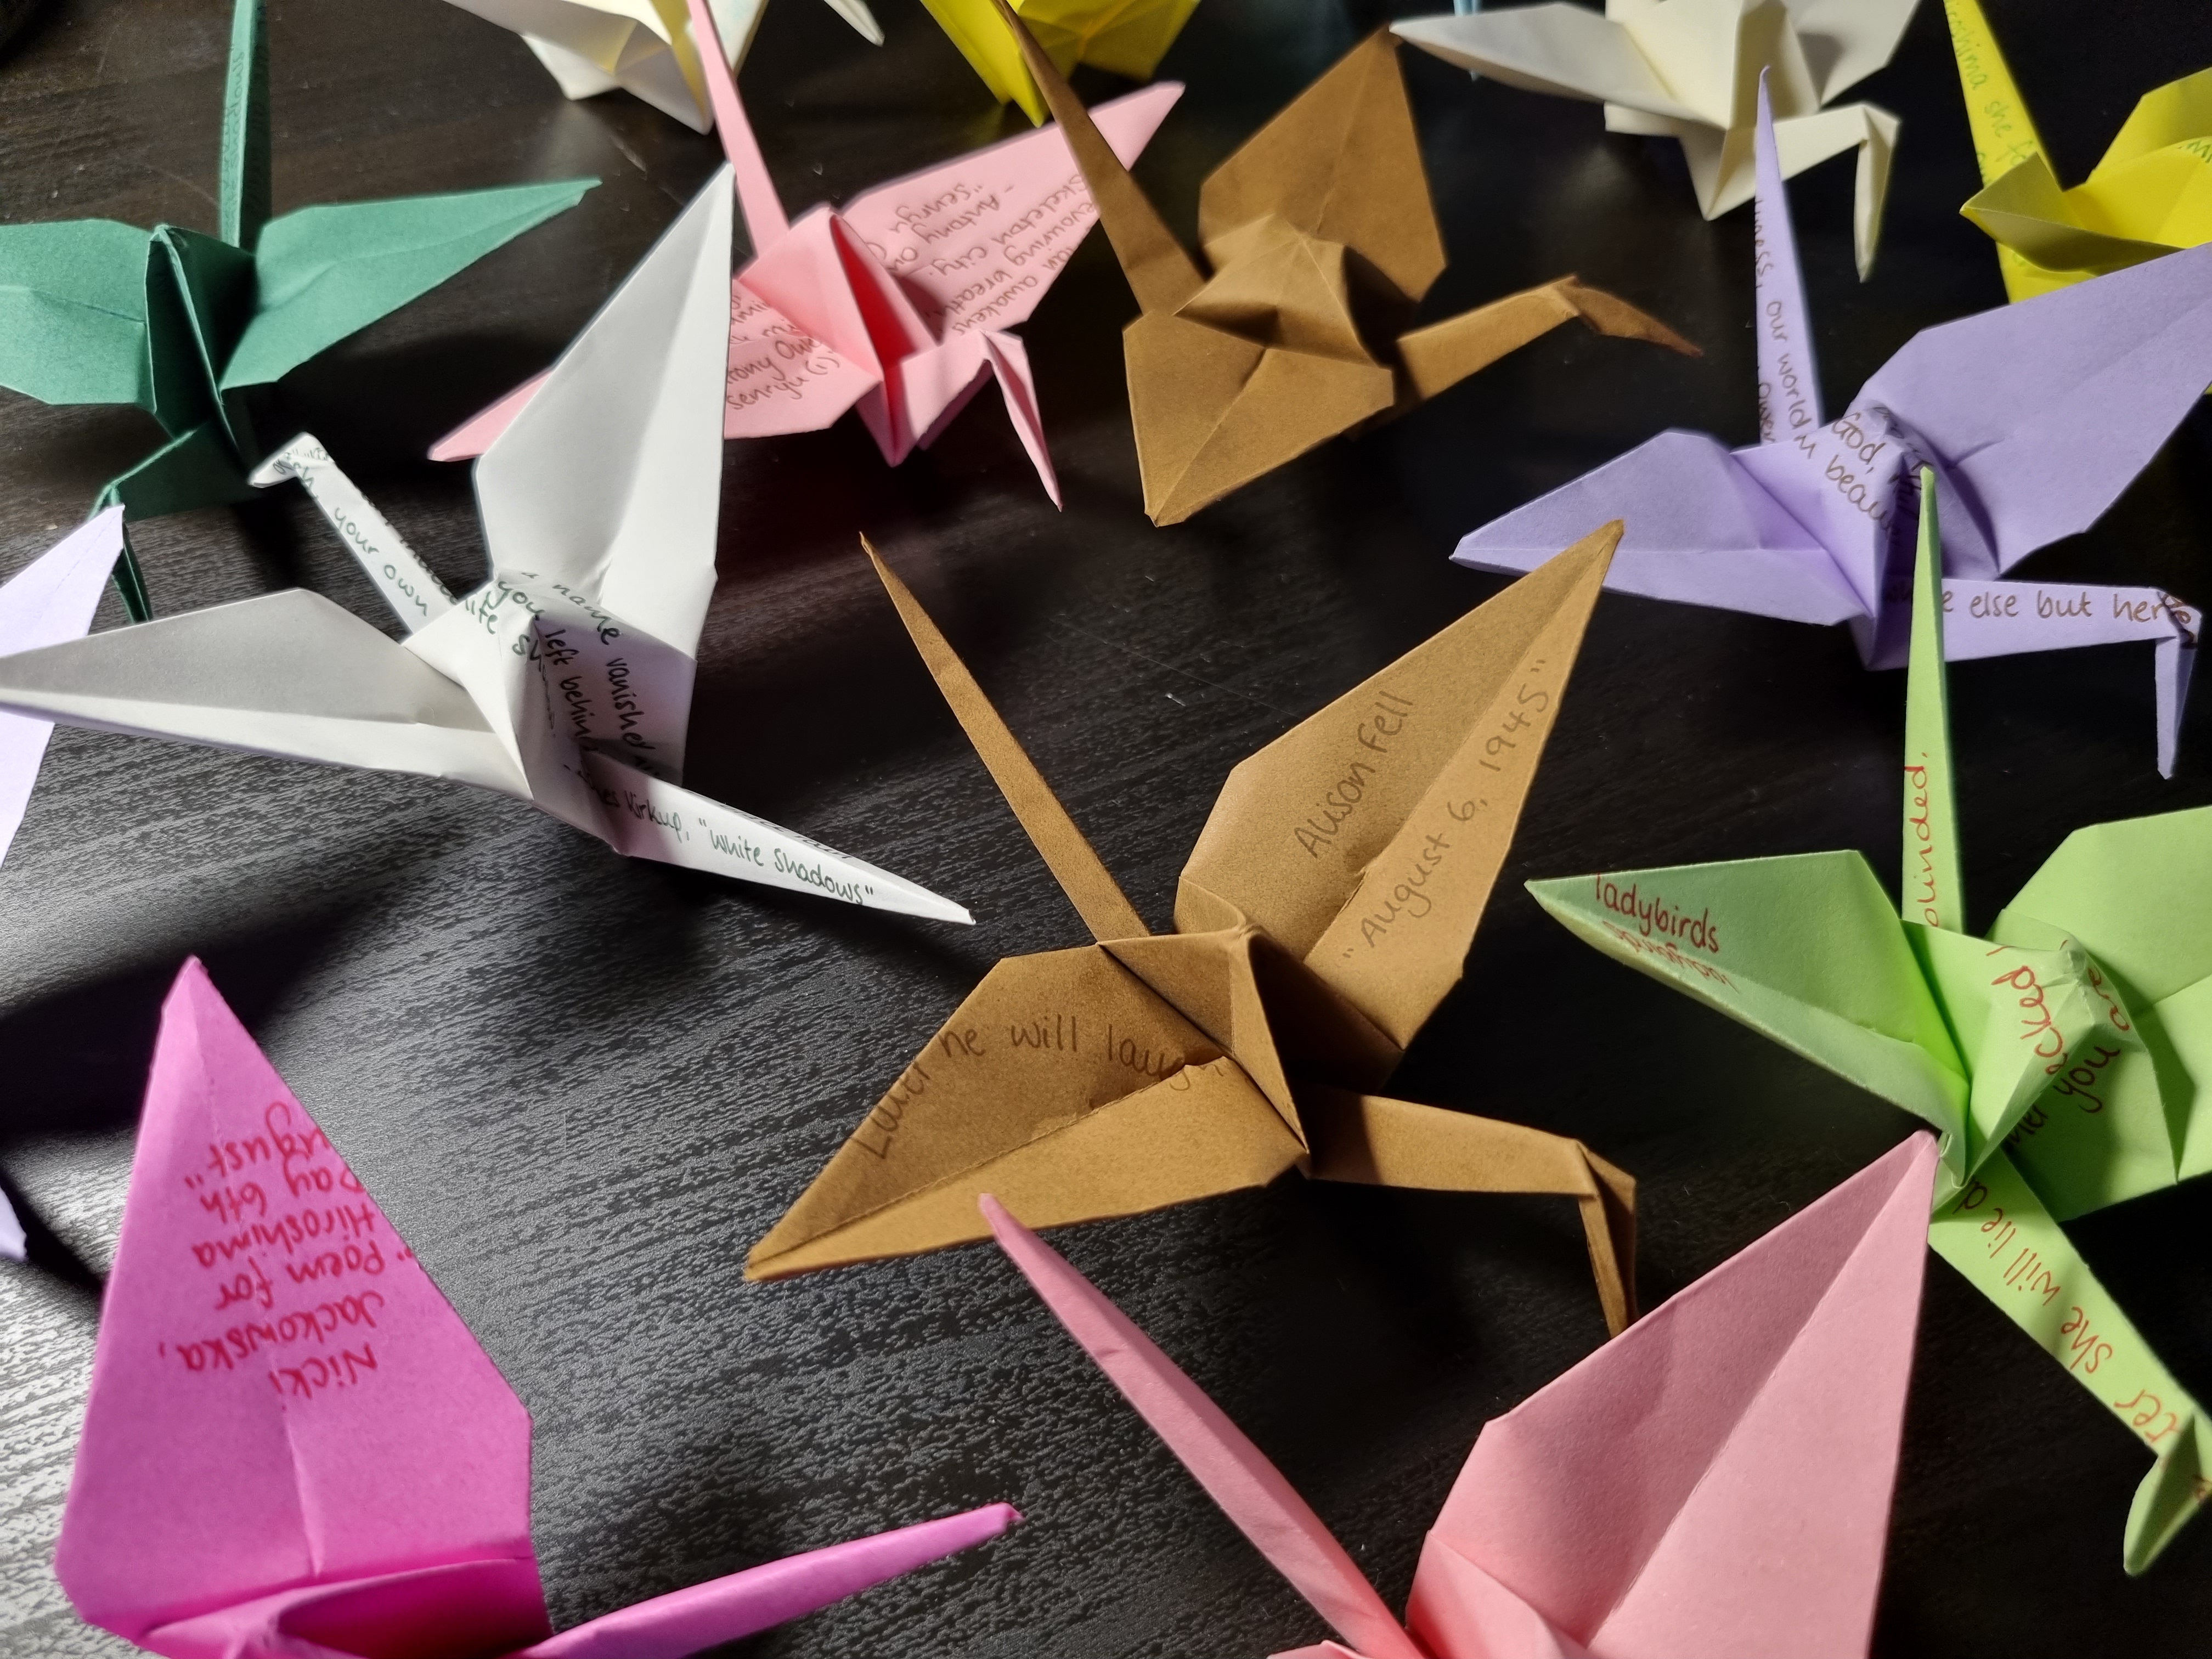 Colourful origami paper cranes on a black table. Some have fragments of poems written on them.